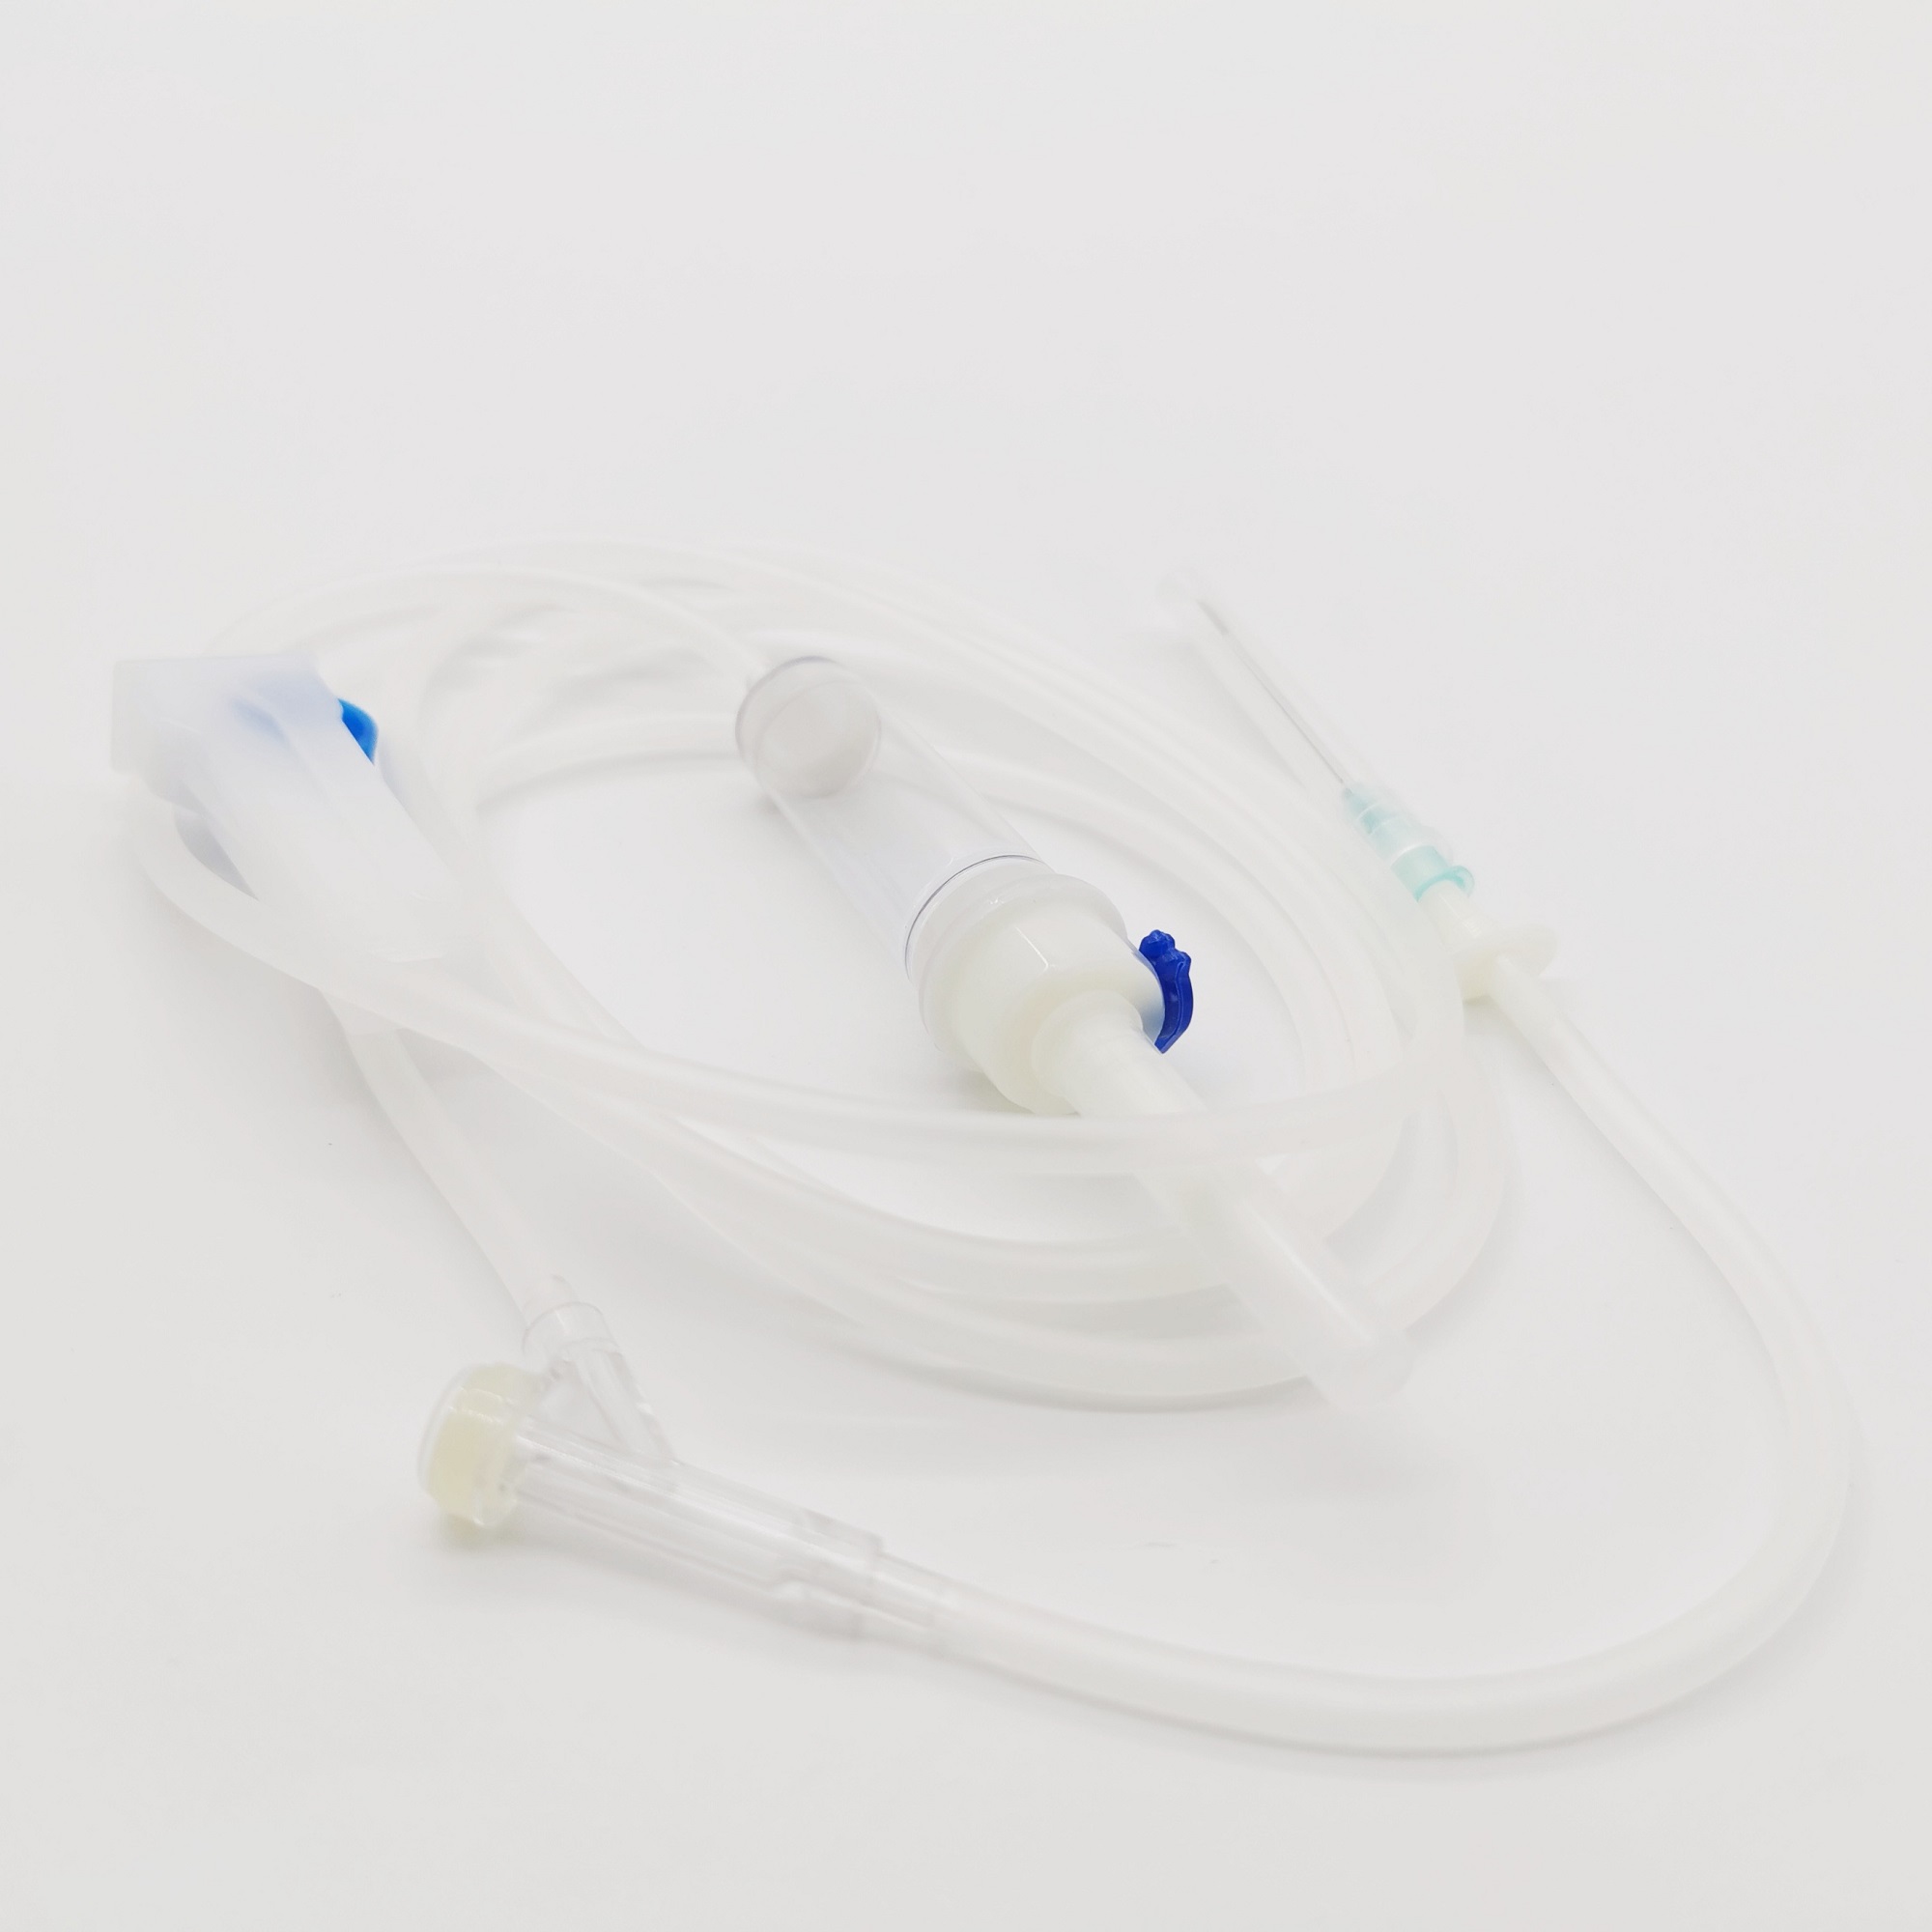 Component of infusion set